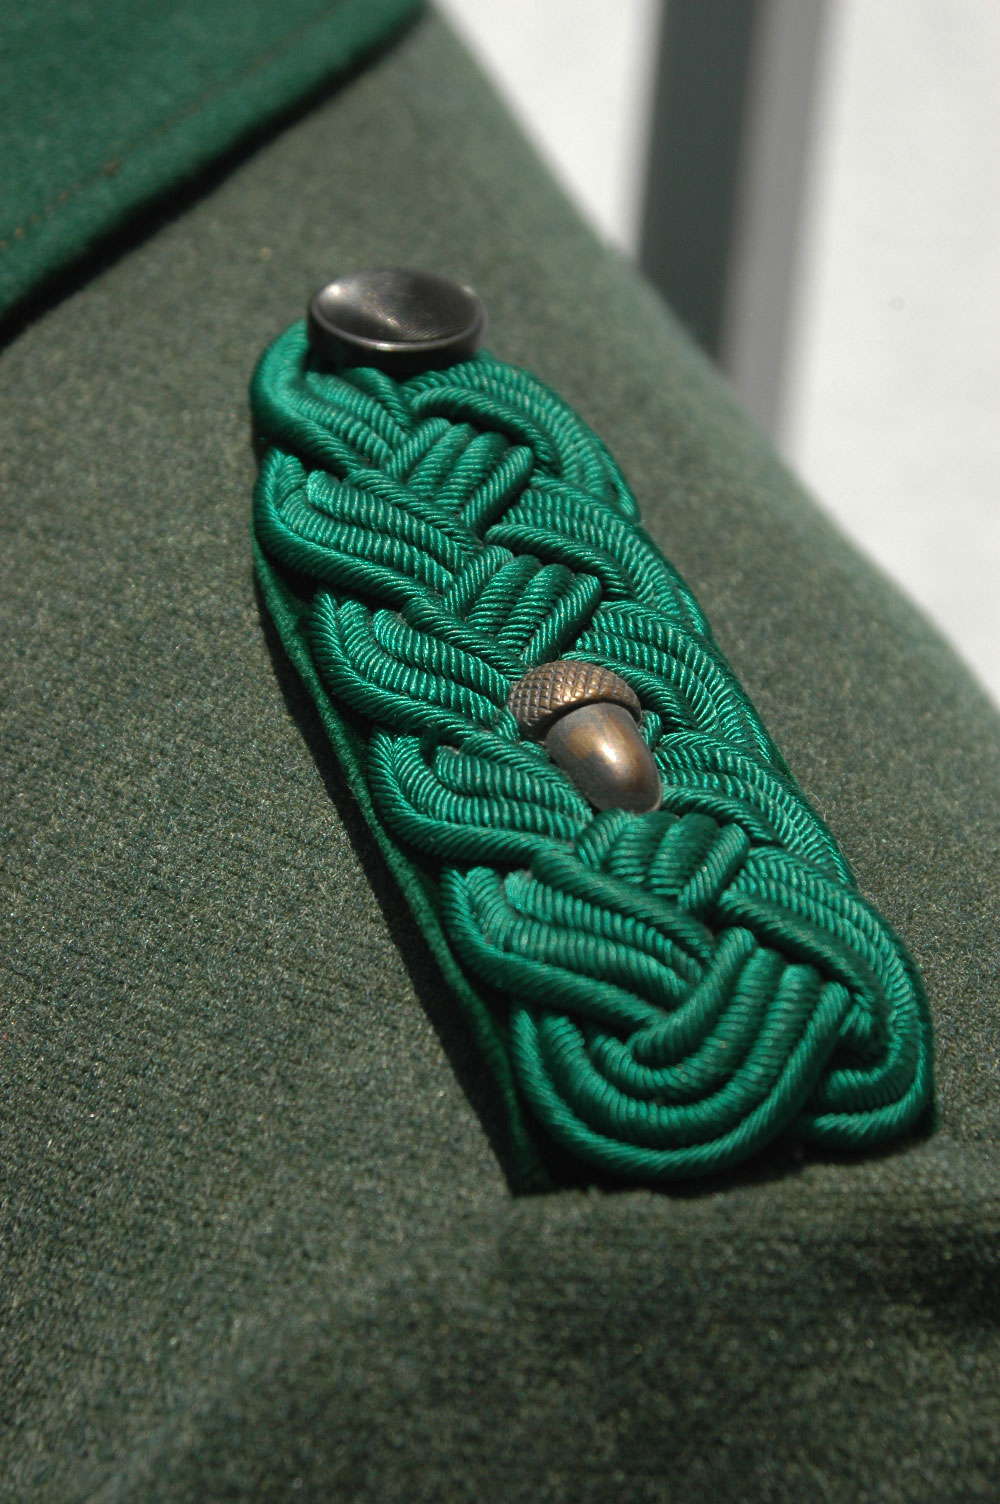 Mint German Forestry Officials Greatcoat